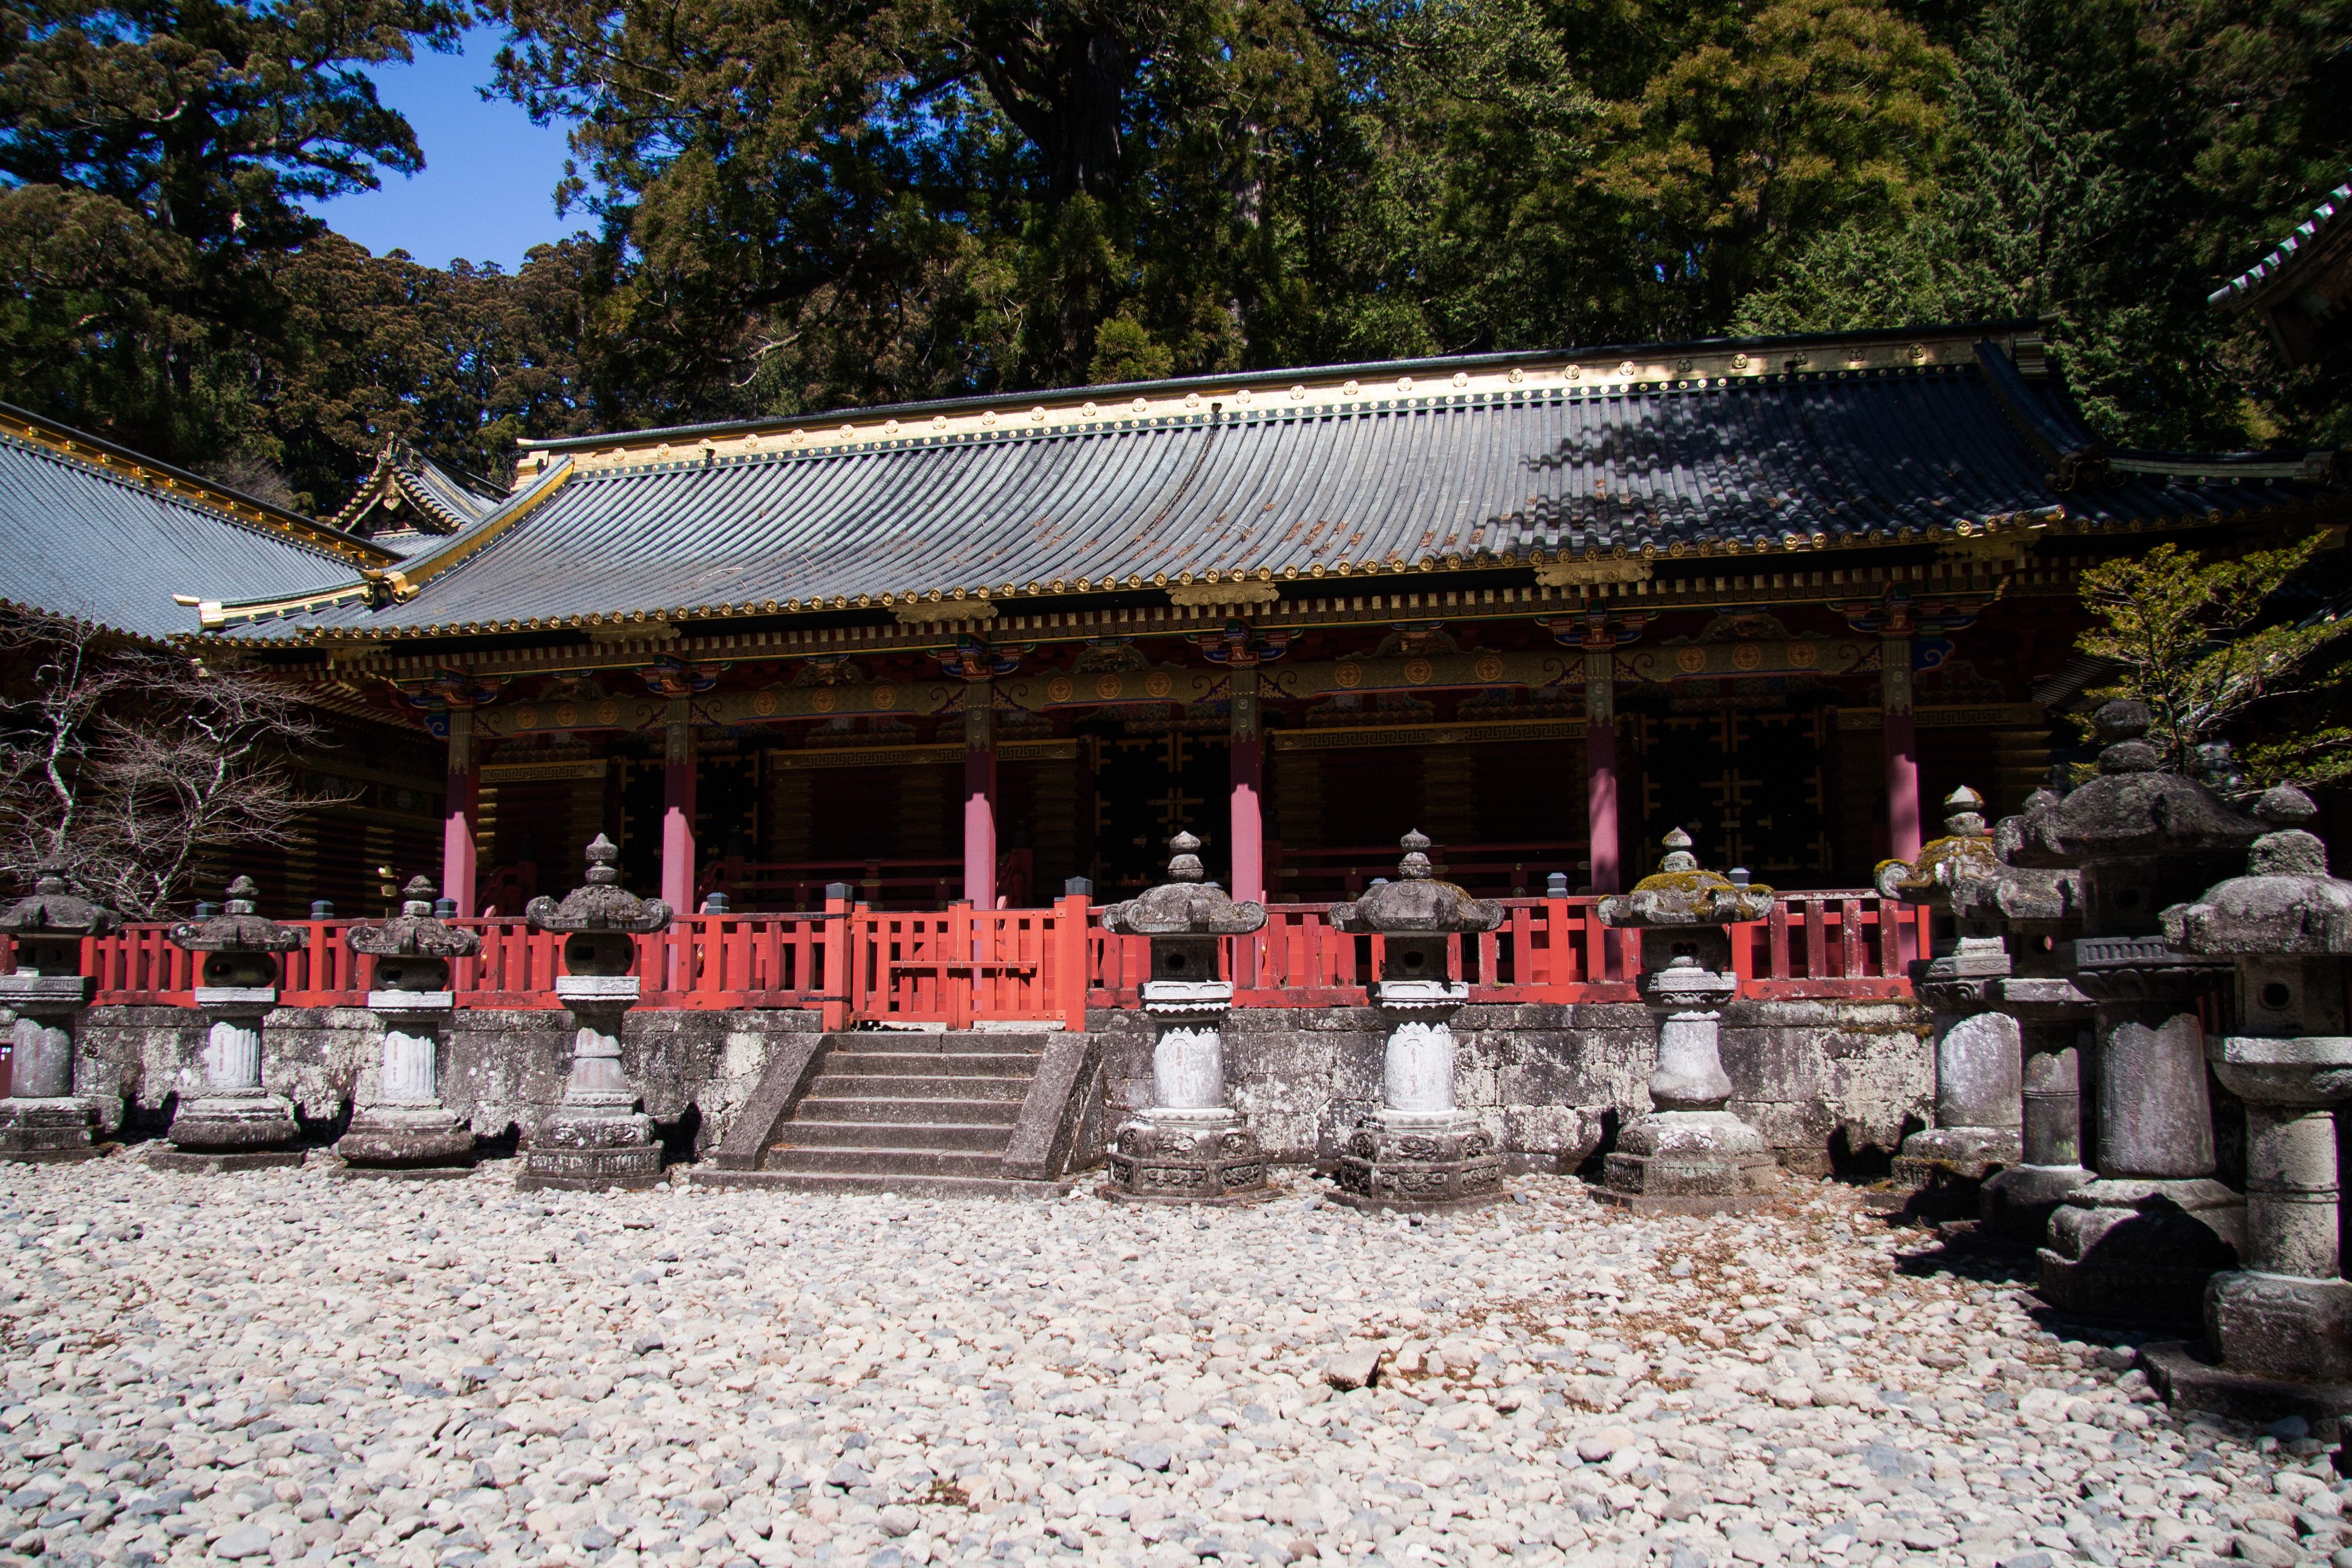 One of the three sacred storehouses.